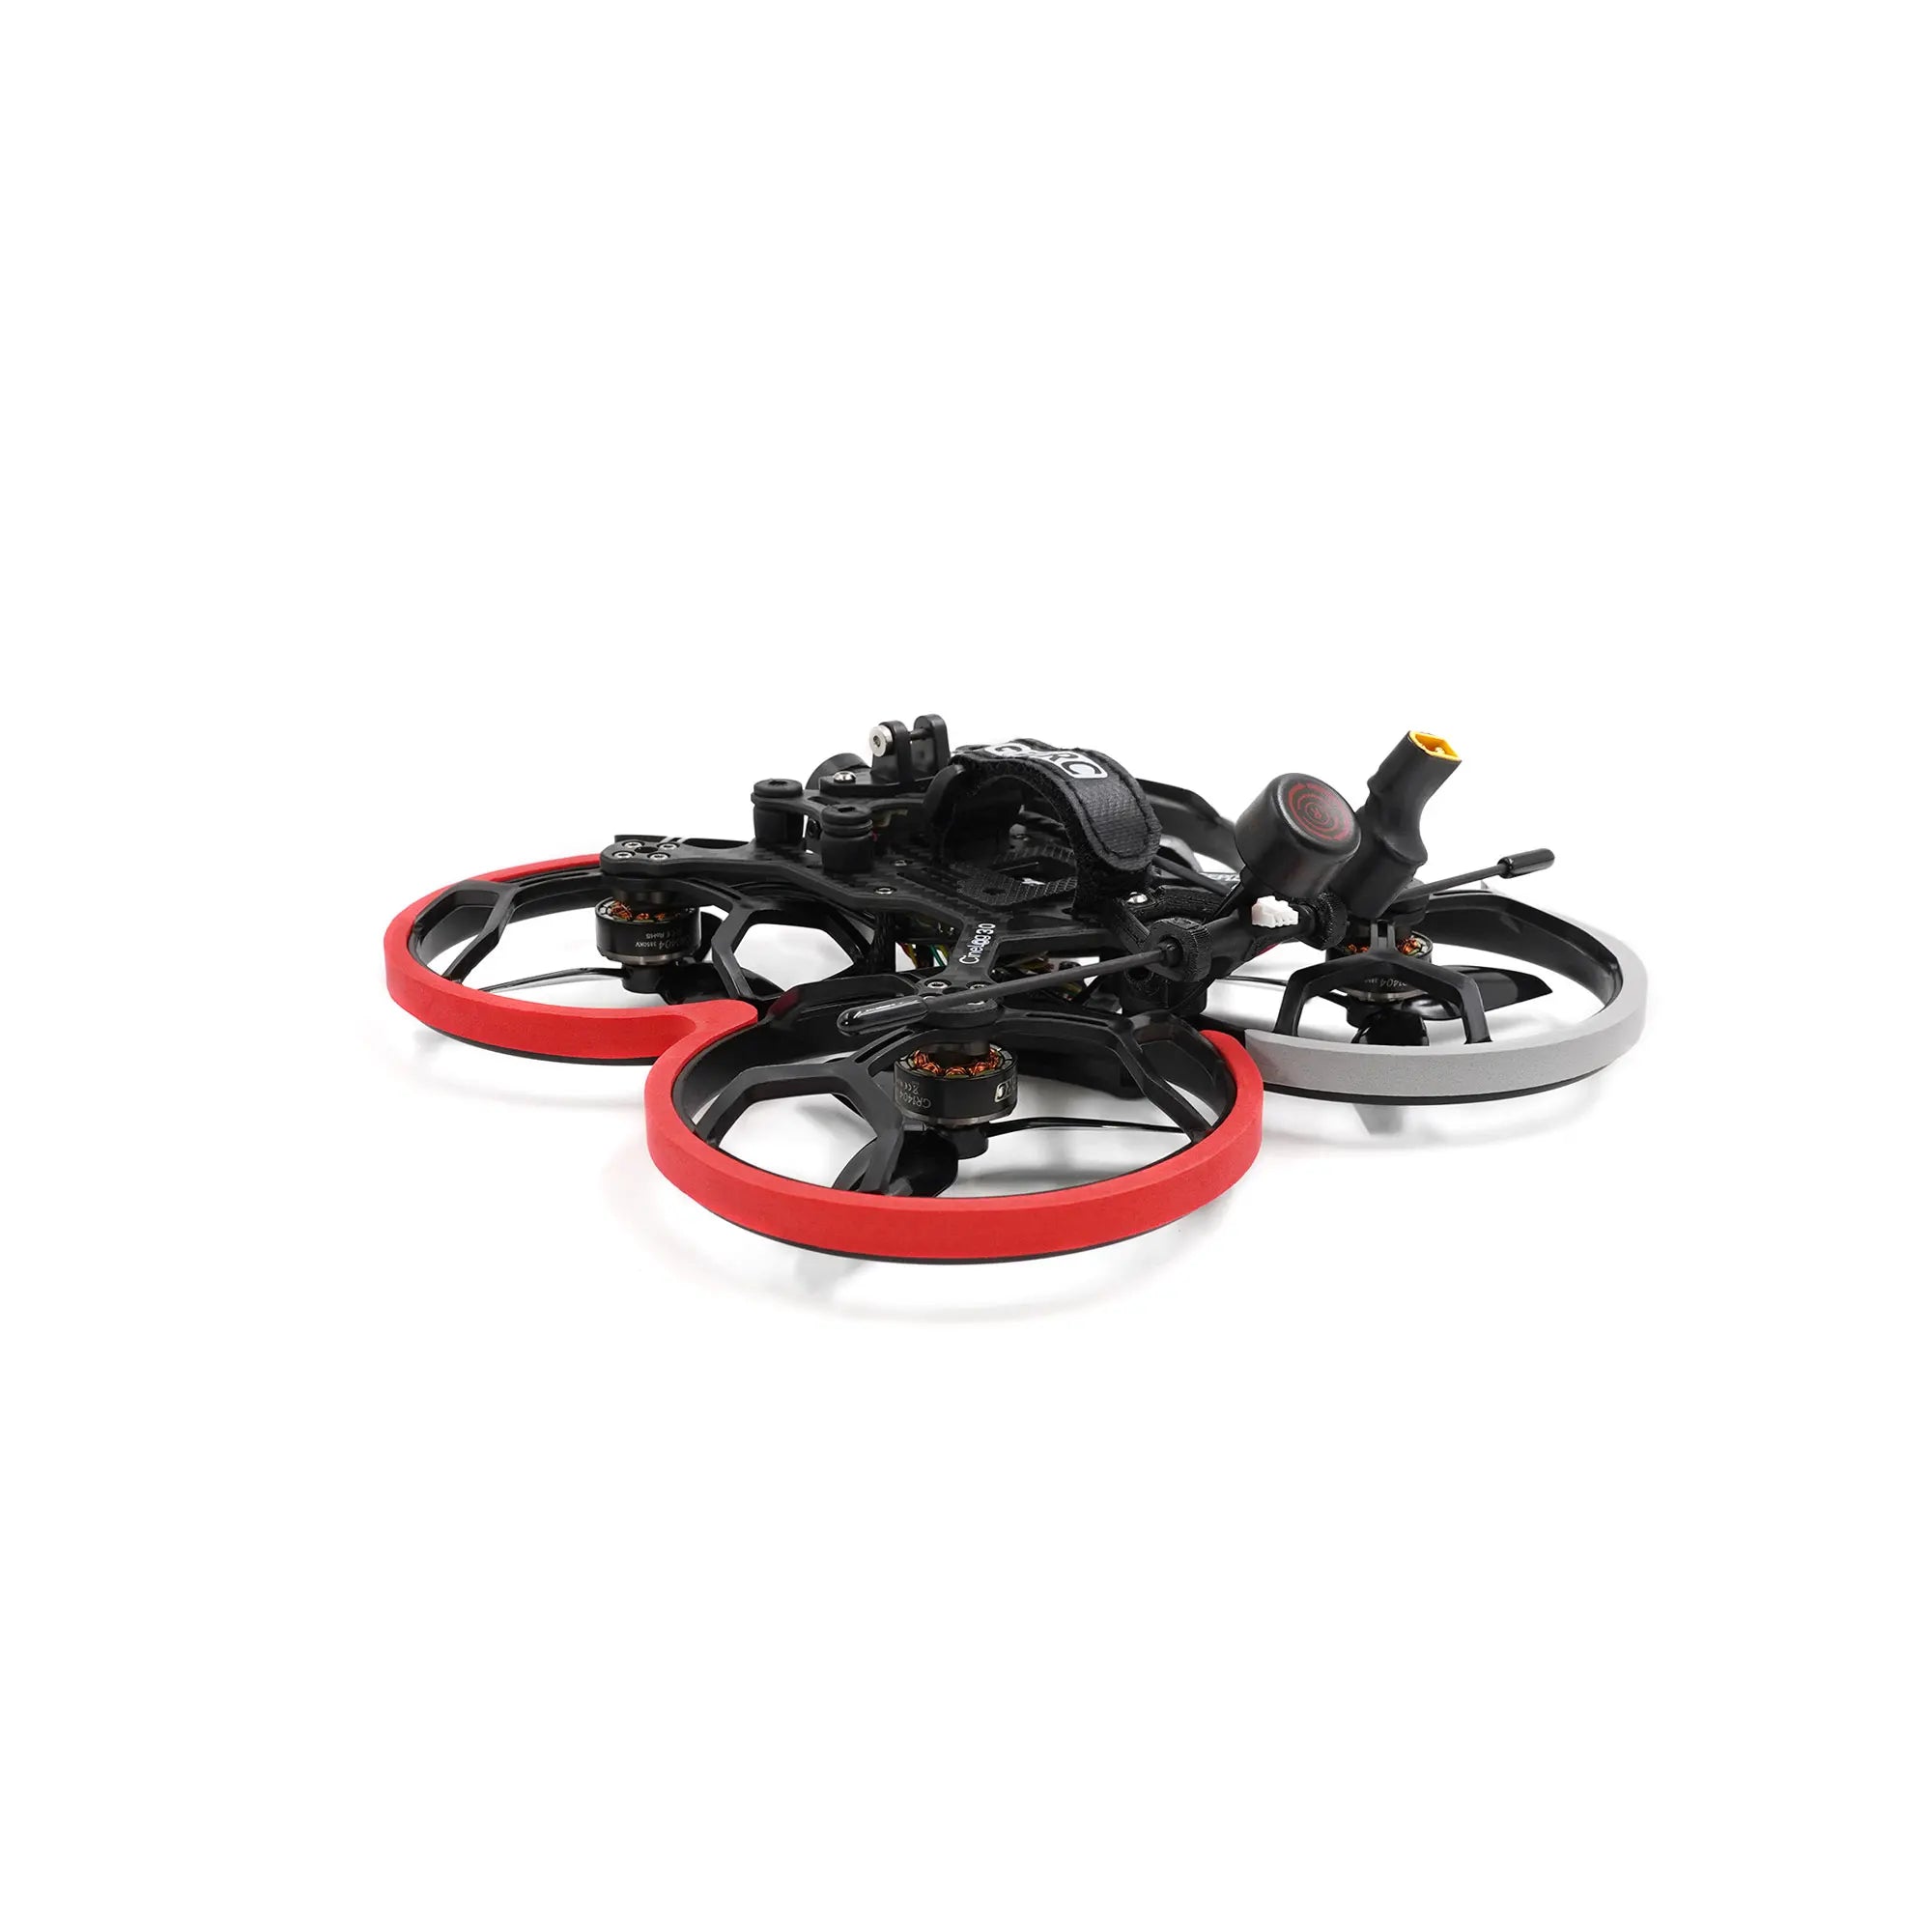 GEPRC CineLog30 Cinewhoop Drone, powered by an STM32F411 MCU and a 6-axis g